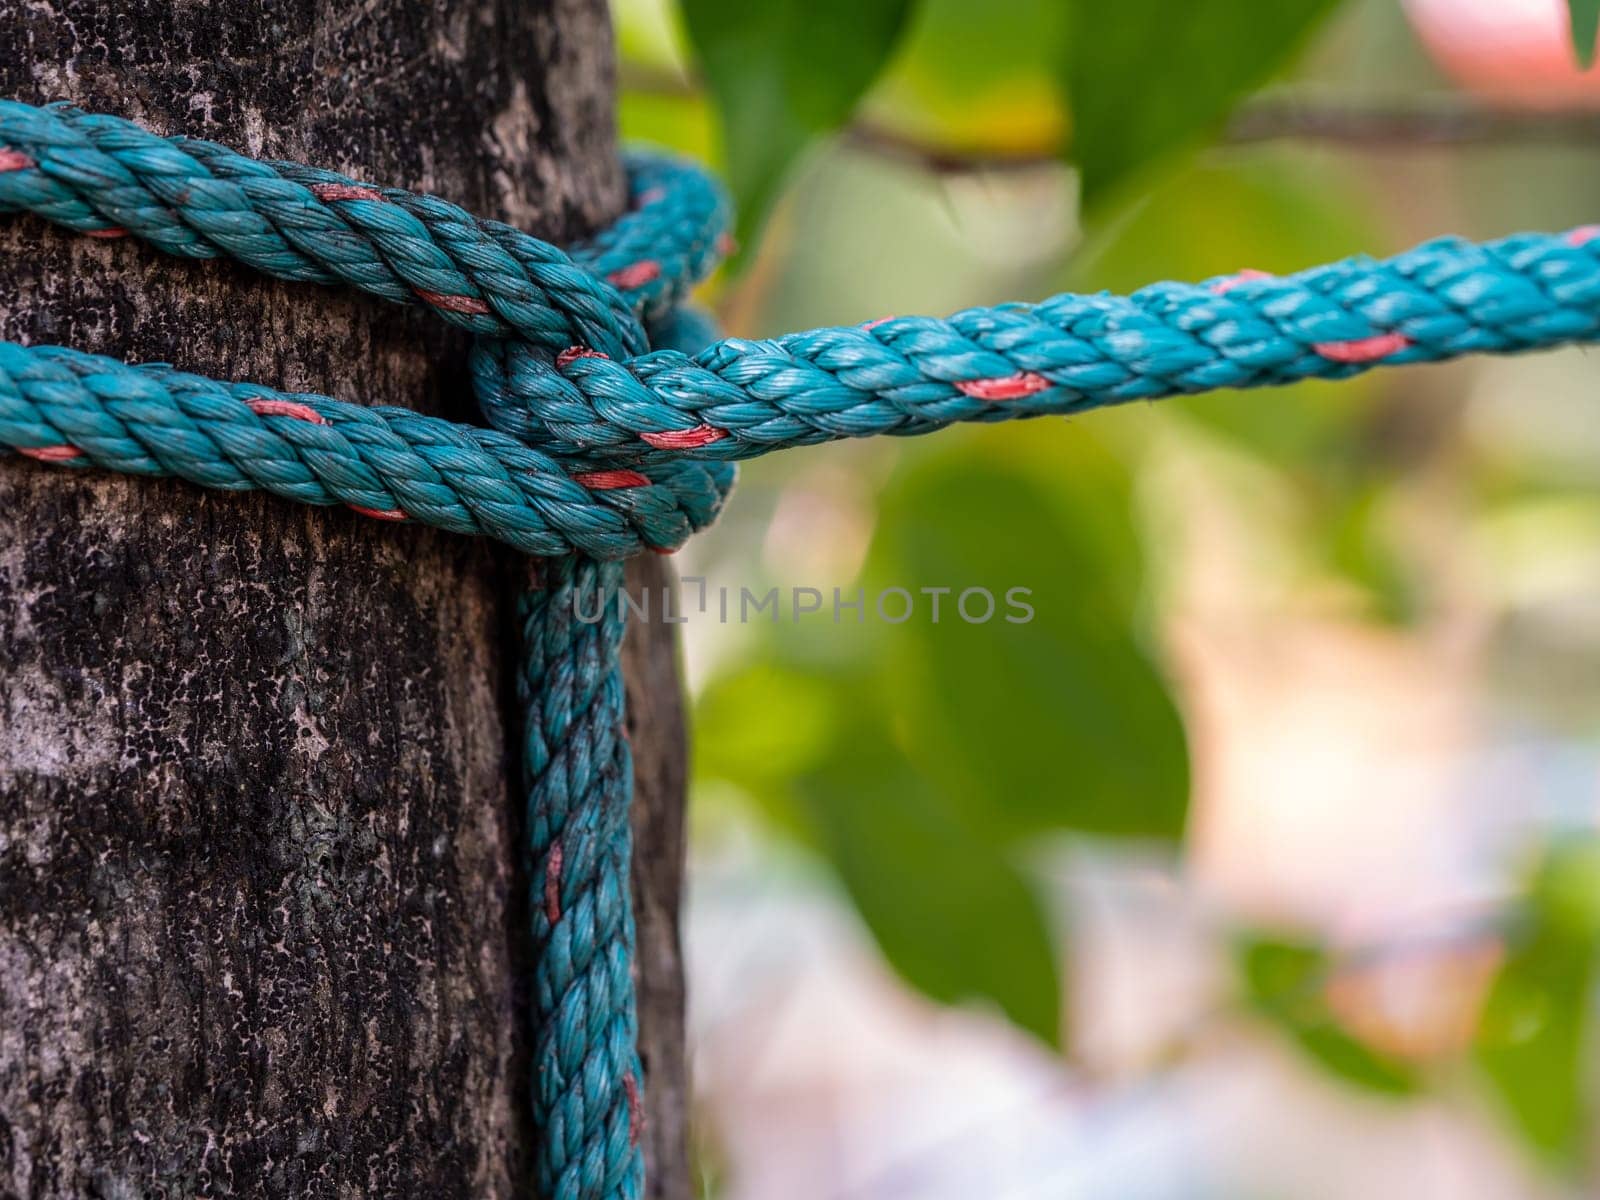 The nylon rope was tightly tied to the big tree